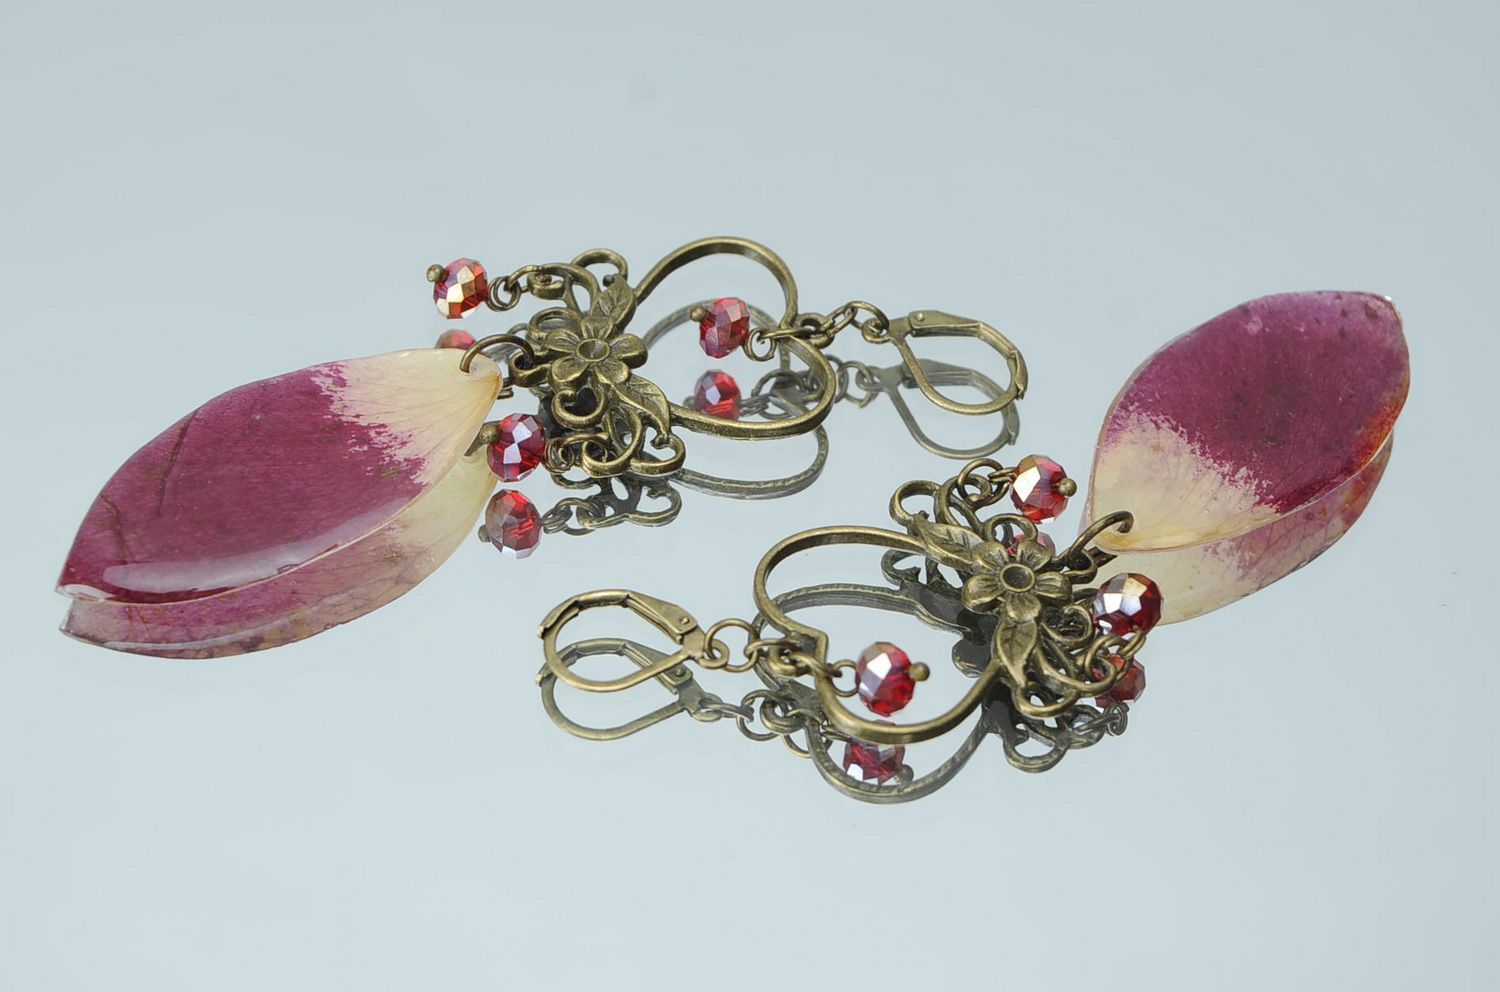 Earrings made from rose petals and crystal beads photo 3